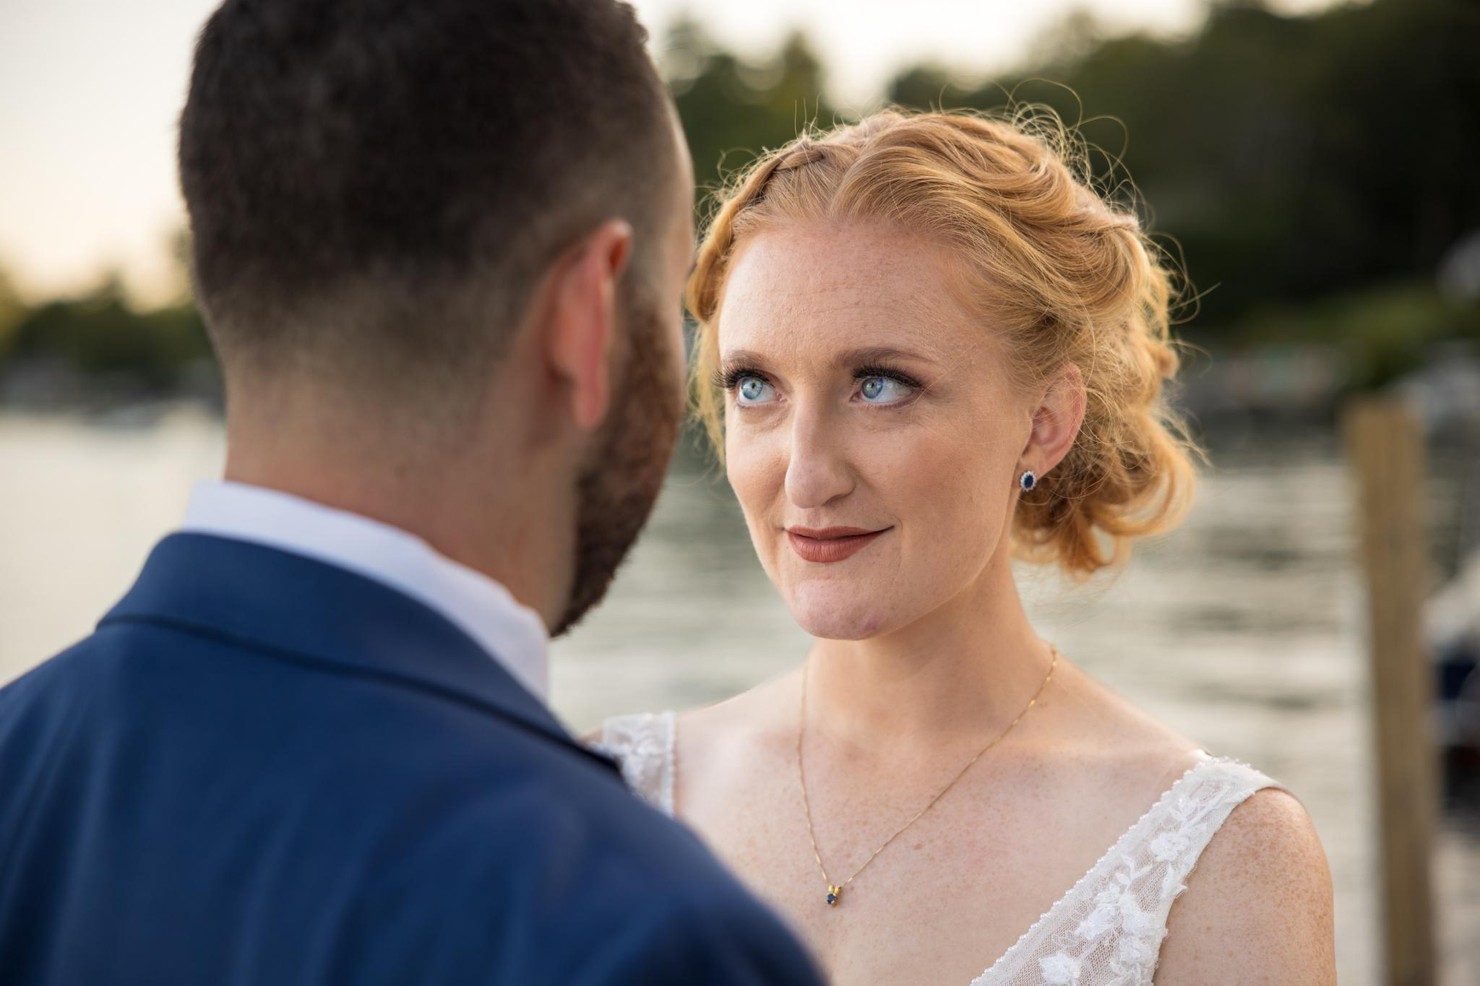 A bride looking intensely at her groom.